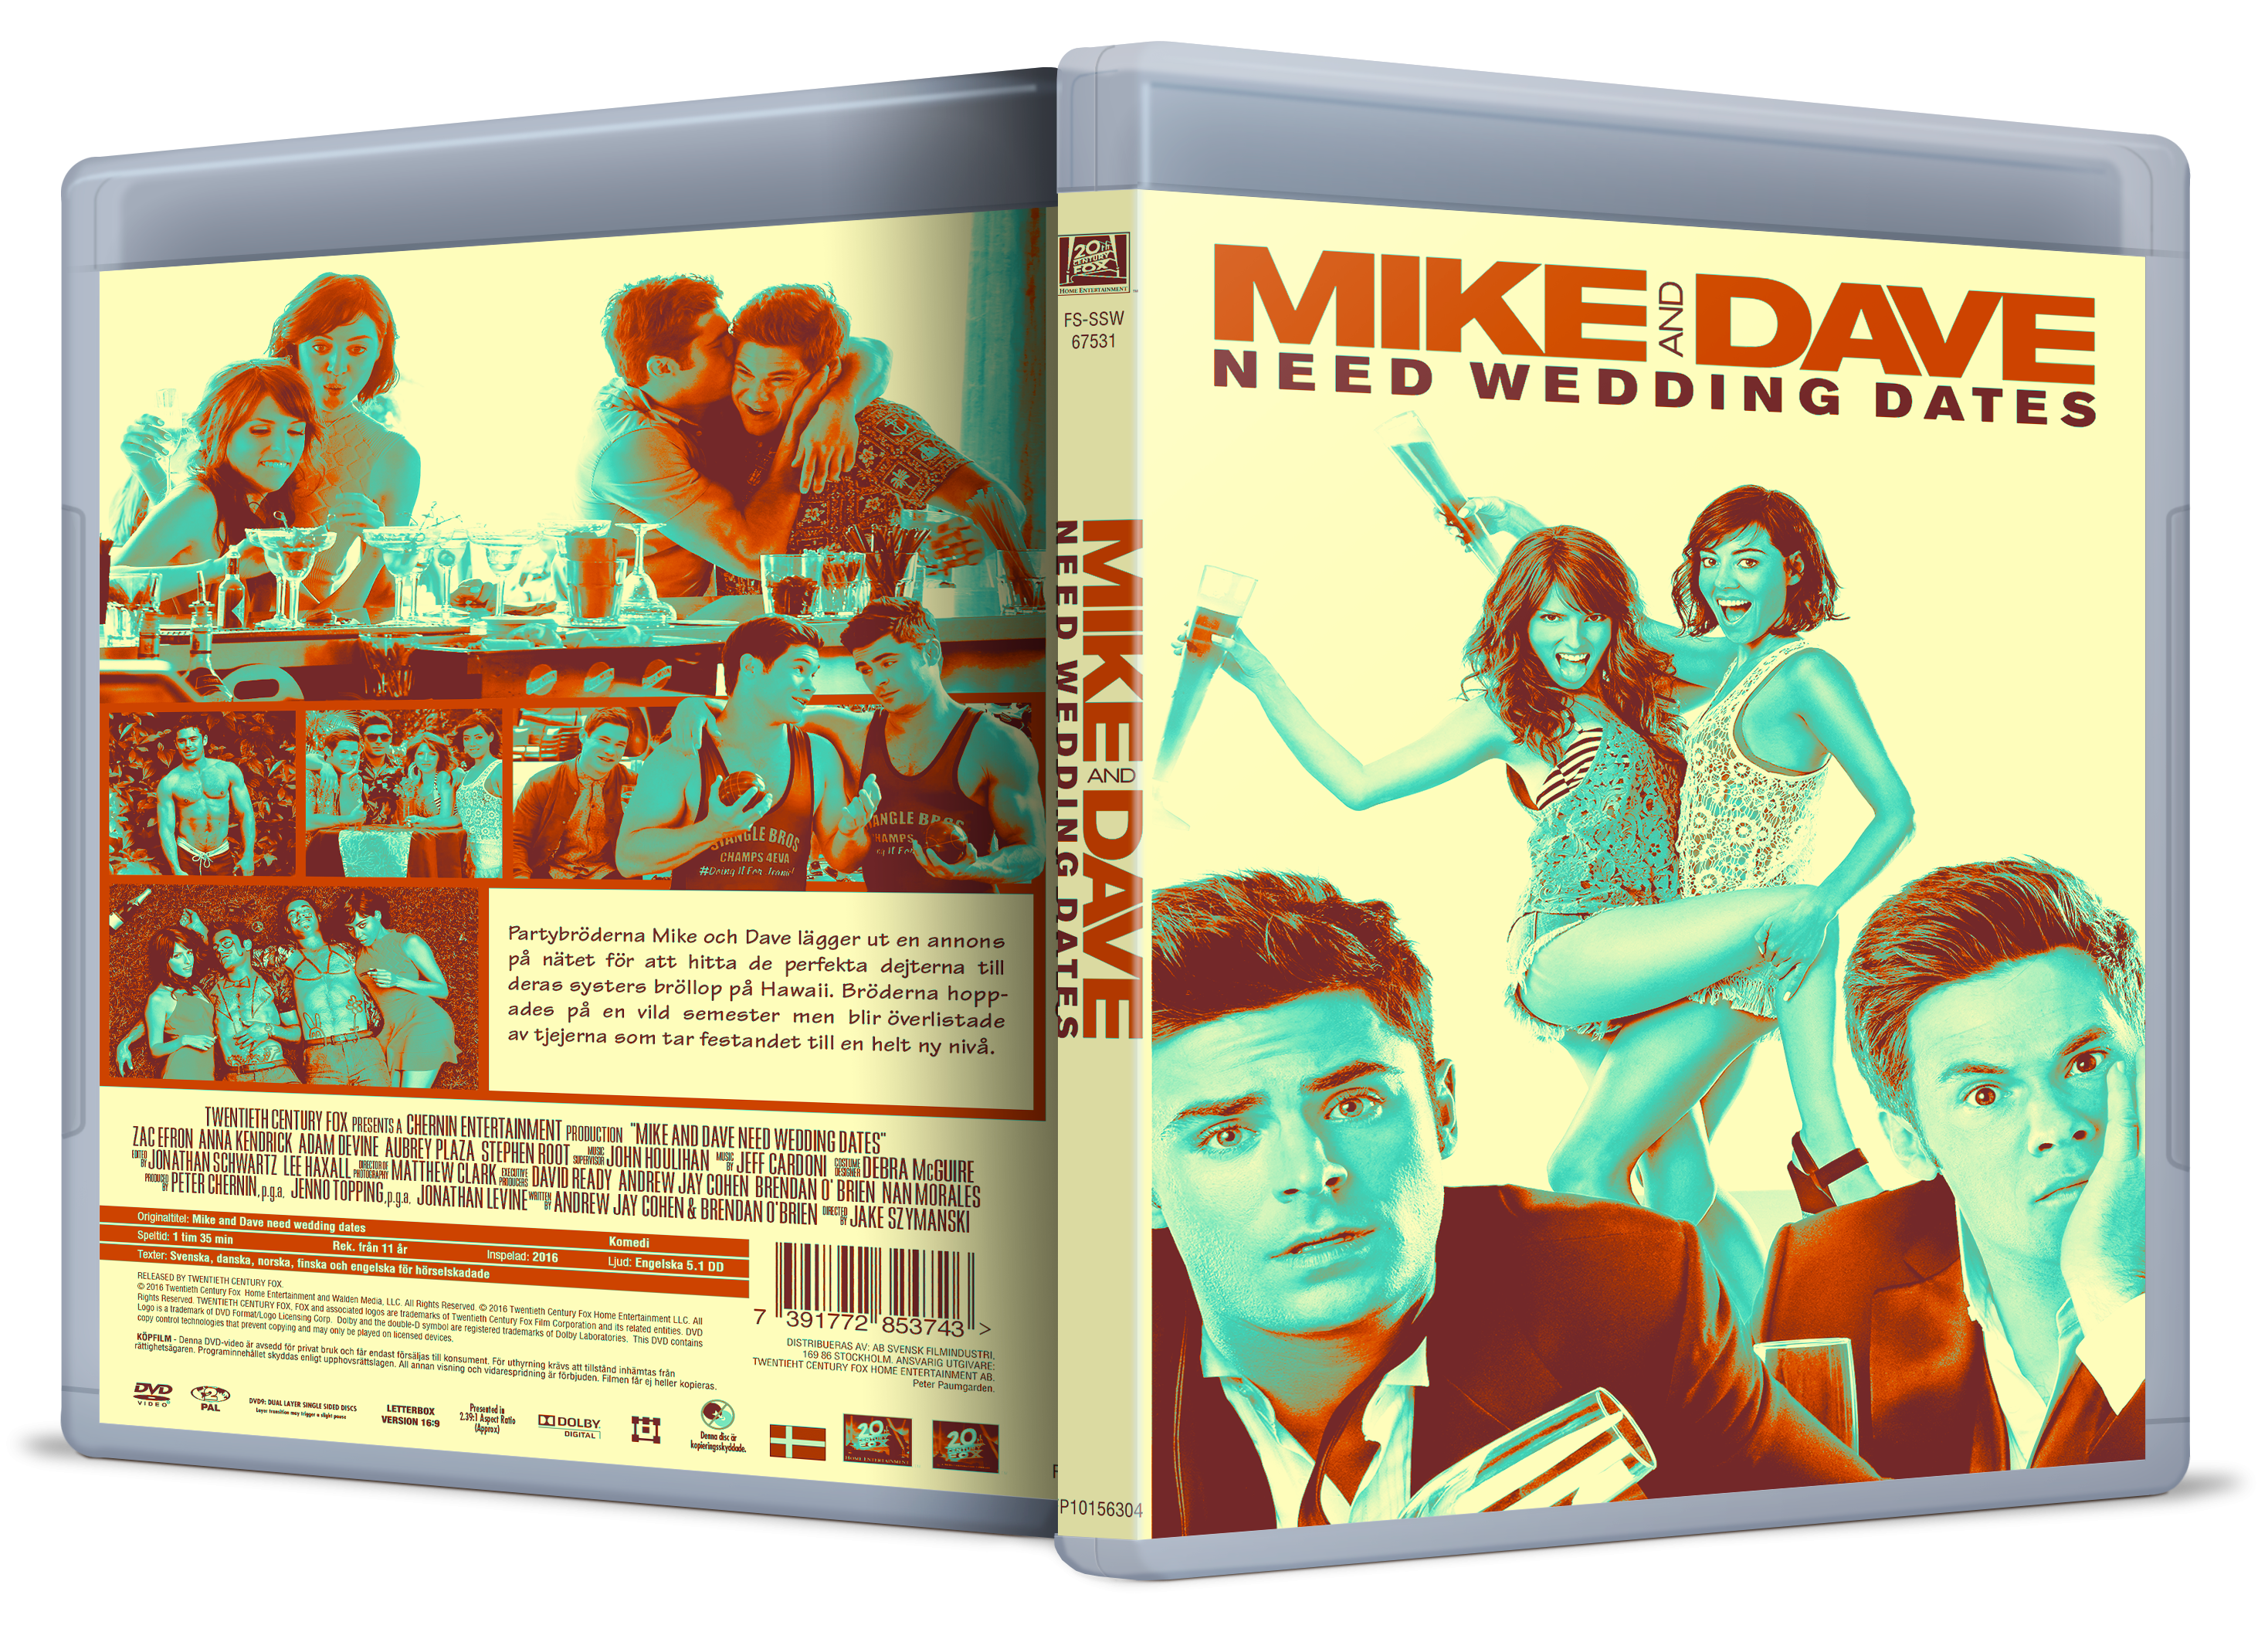 Mike And Dave Need Wedding Dates box cover